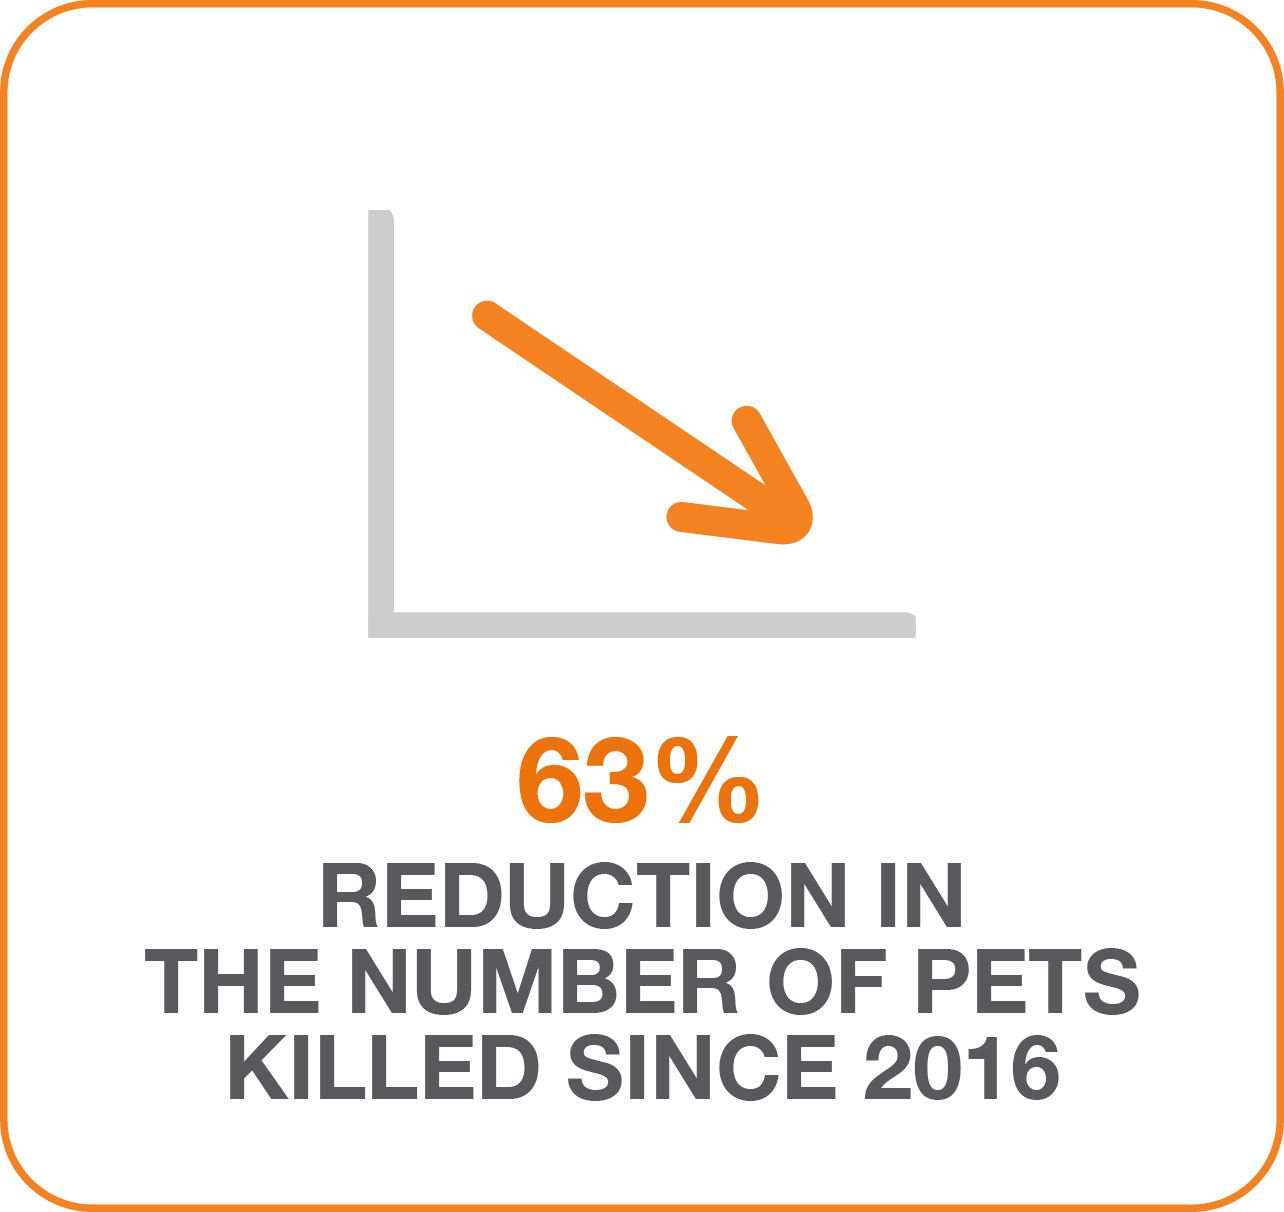 Reduction in number of pets killed statistic